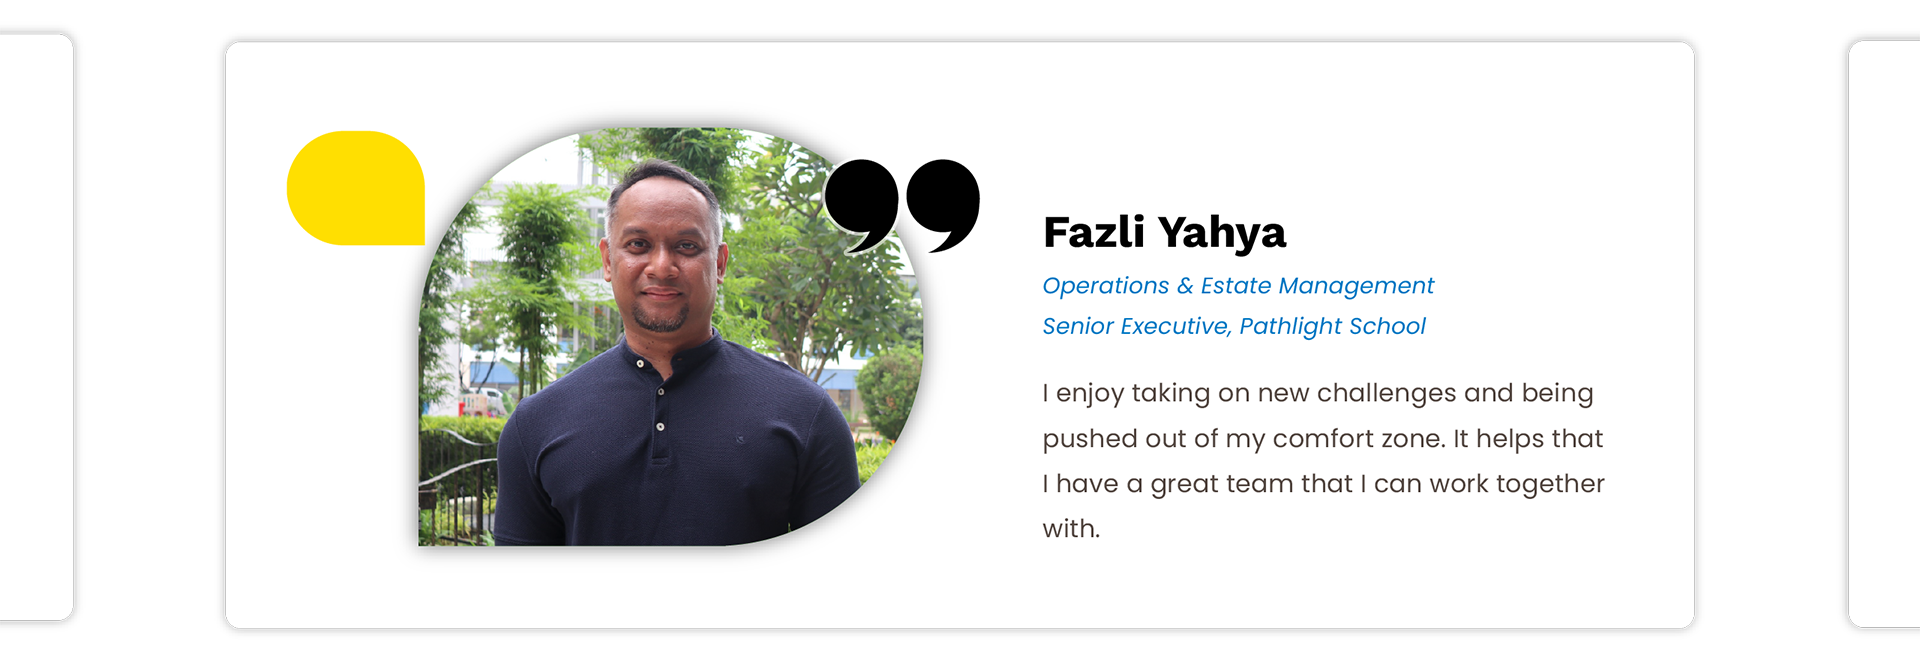 Fazli Yahya: I enjoy taking on new challenges and being pushed out of my comfort zone. It helps that I have a great team that I can work together with.